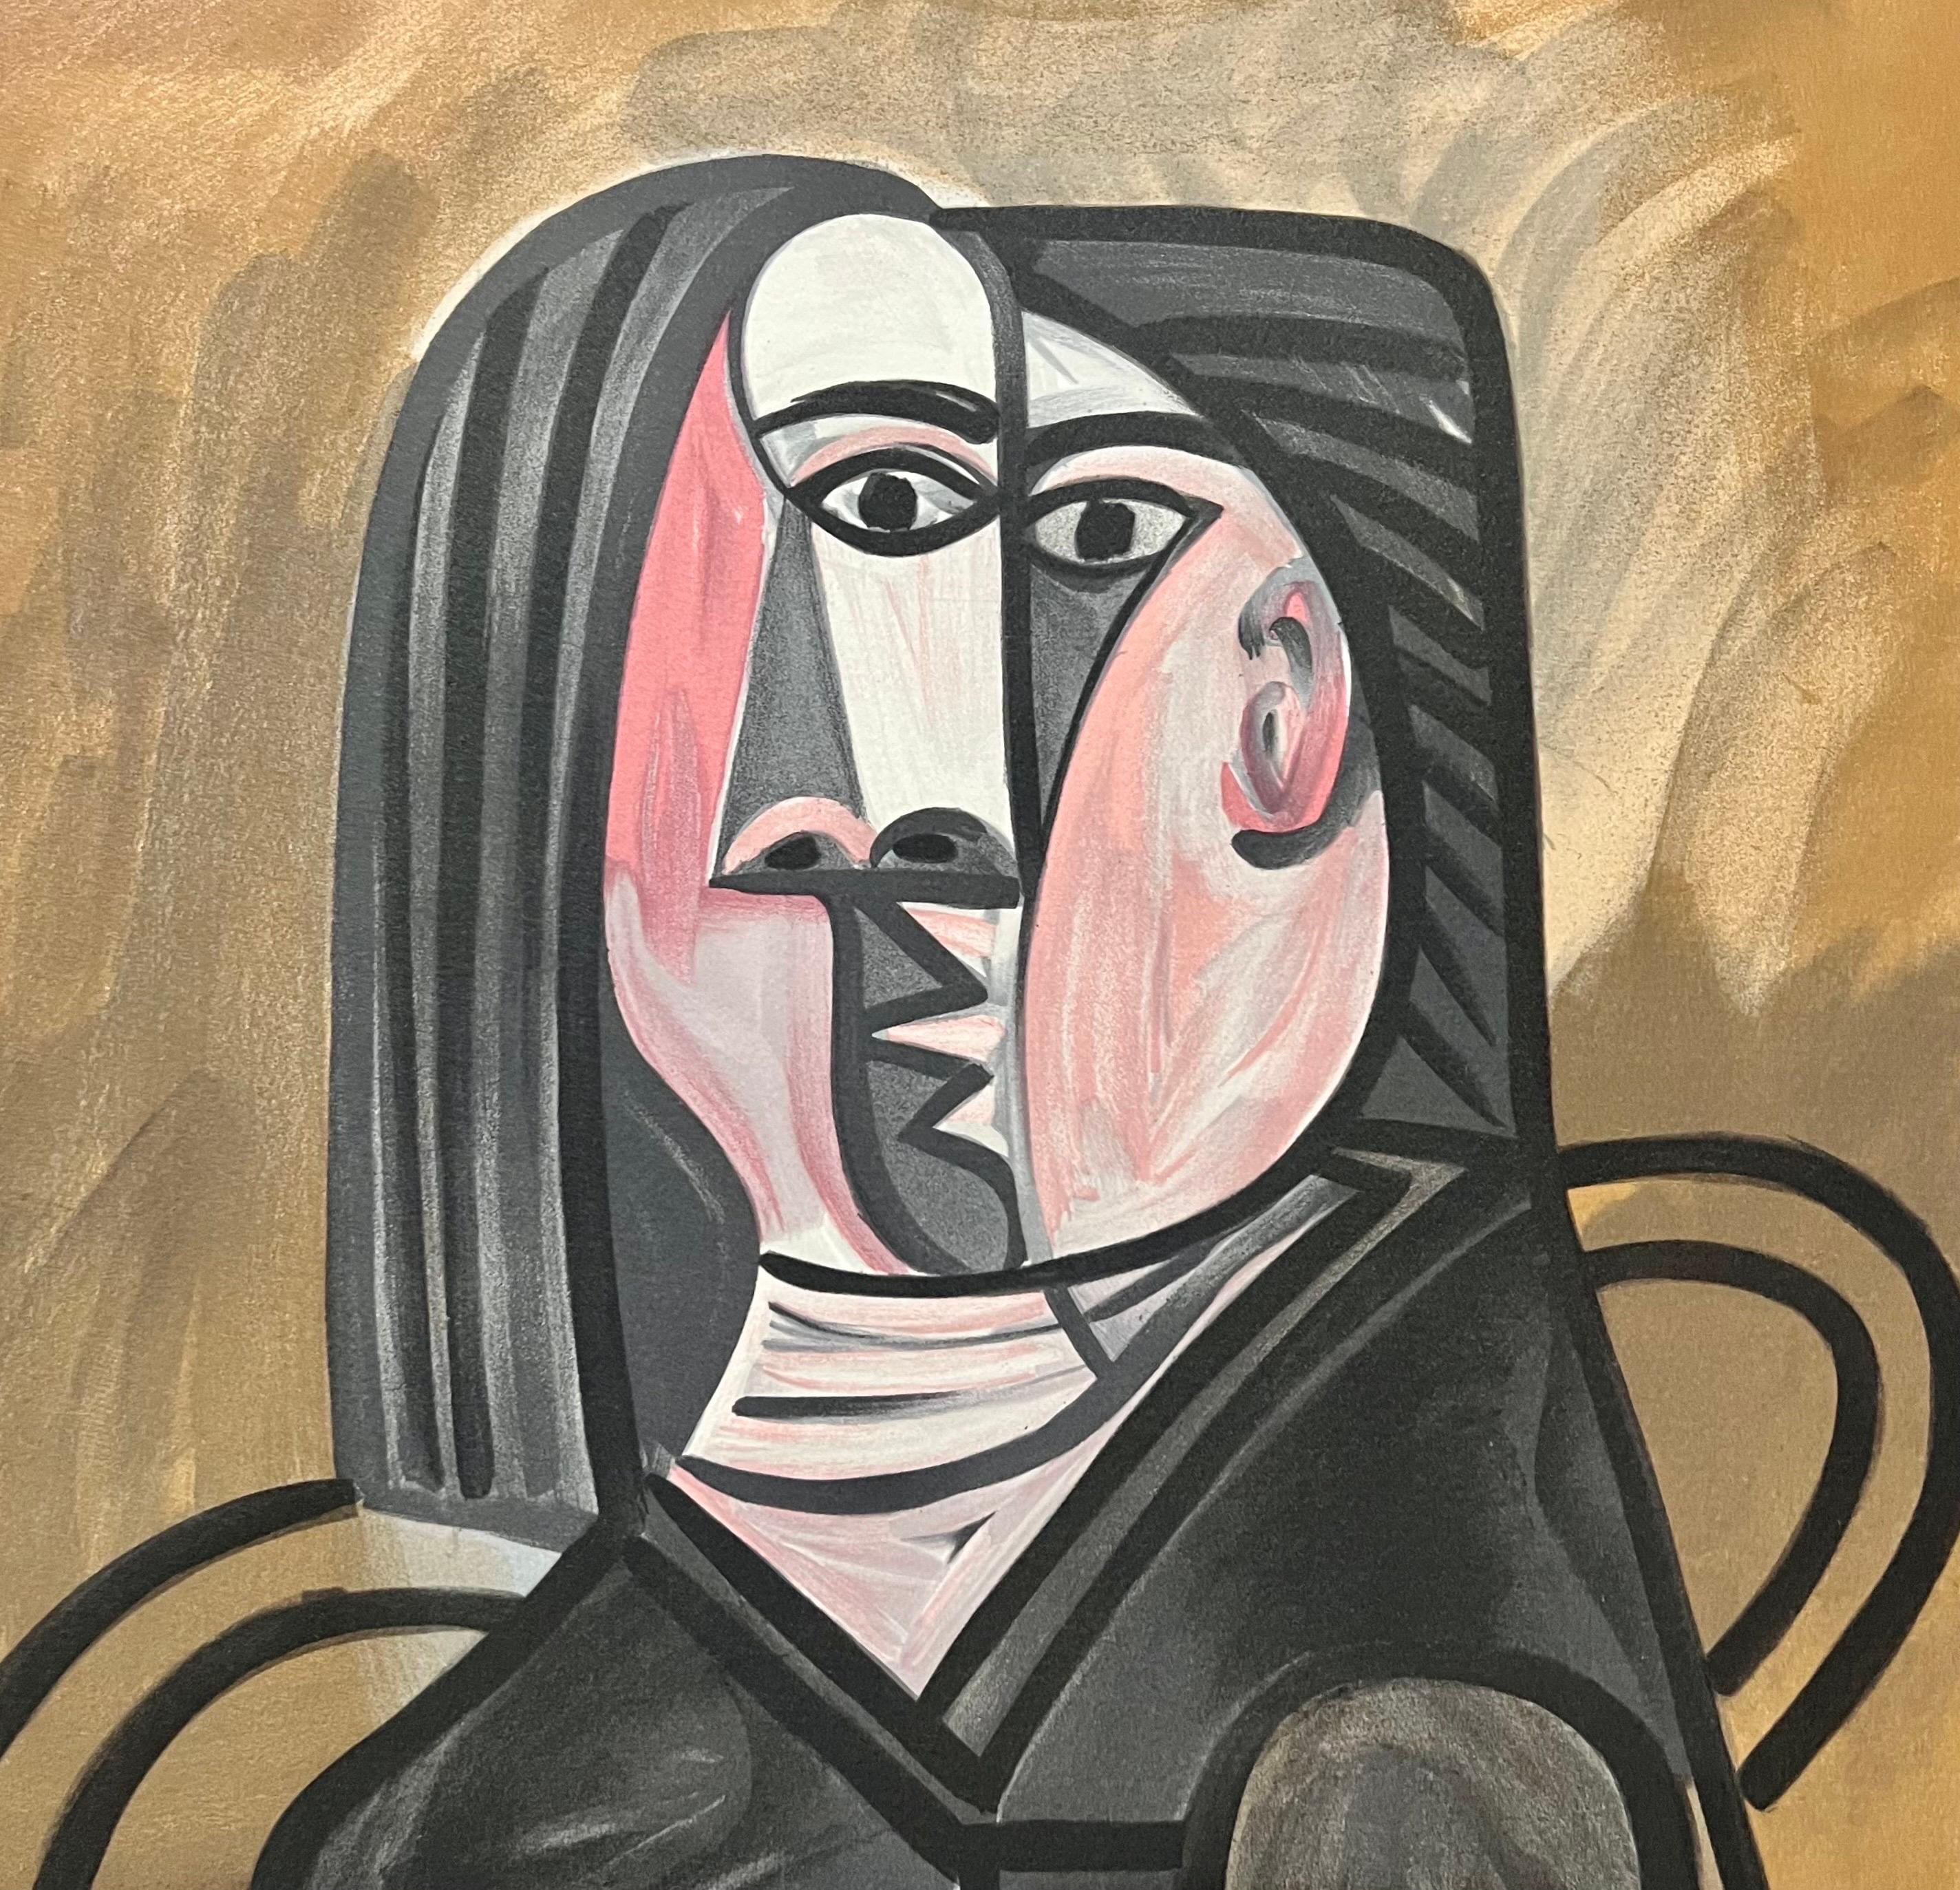 Pablo Picasso (after)
